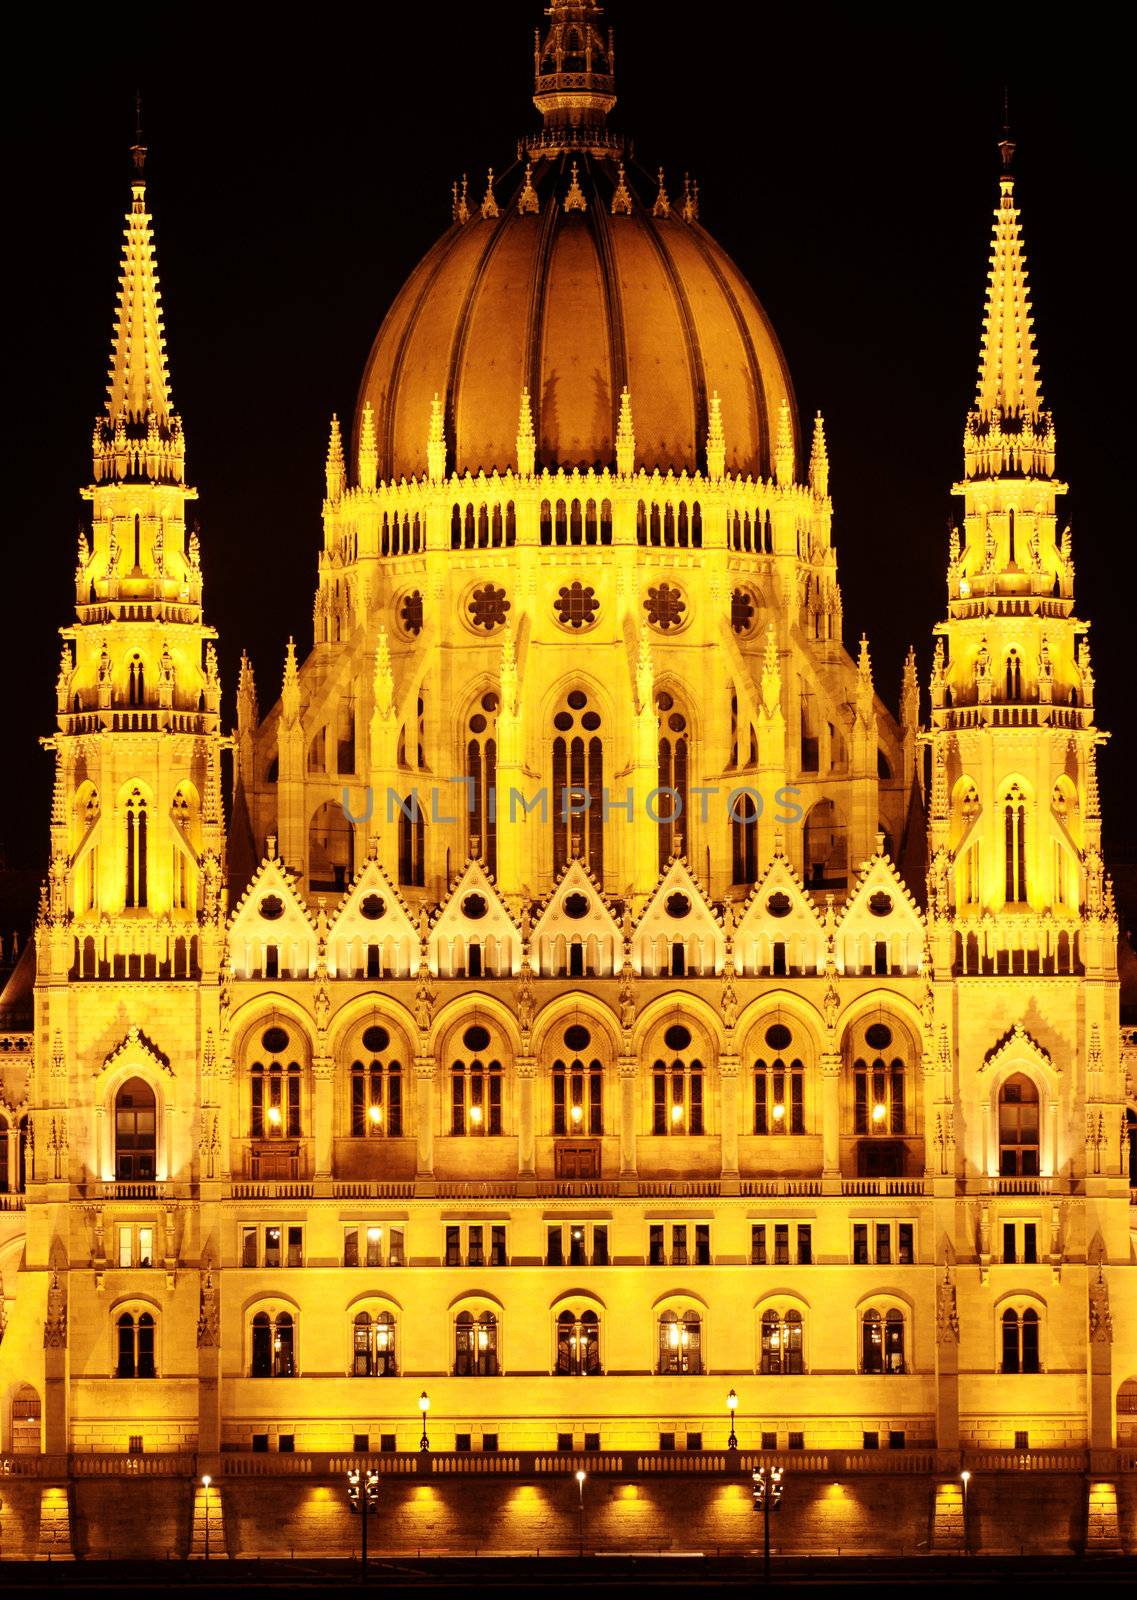 Budapest Parliament building in Hungary (Budapest) at twilight.